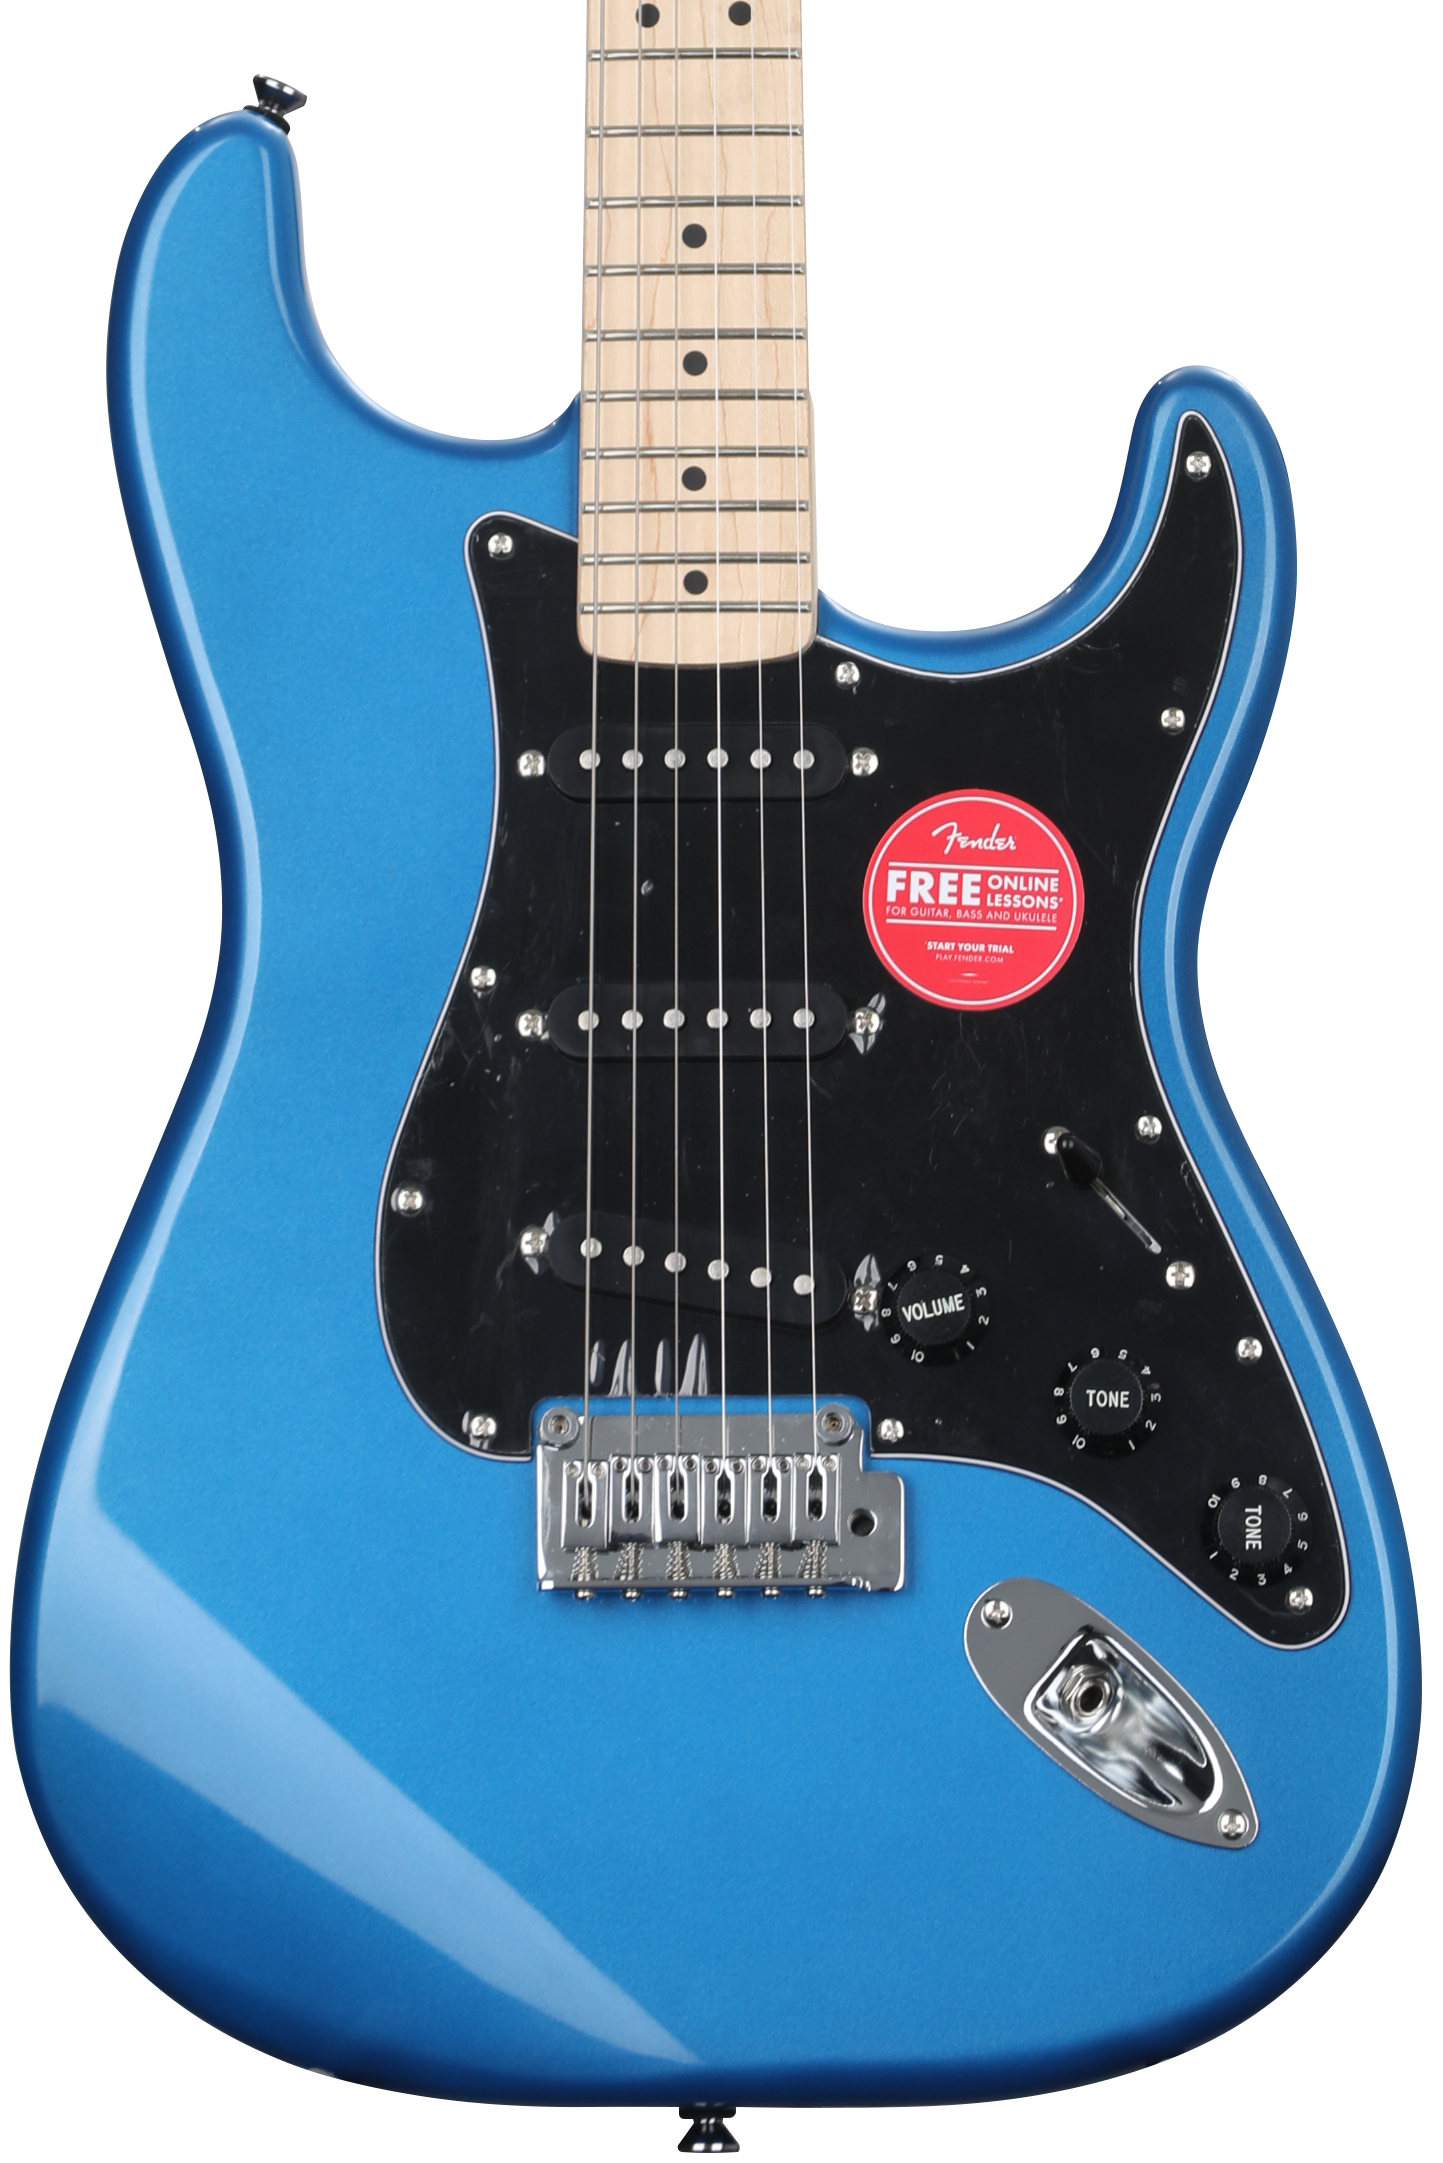 Squier Affinity Stratocaster HSS Electric Guitar Pack Lake Placid Blue